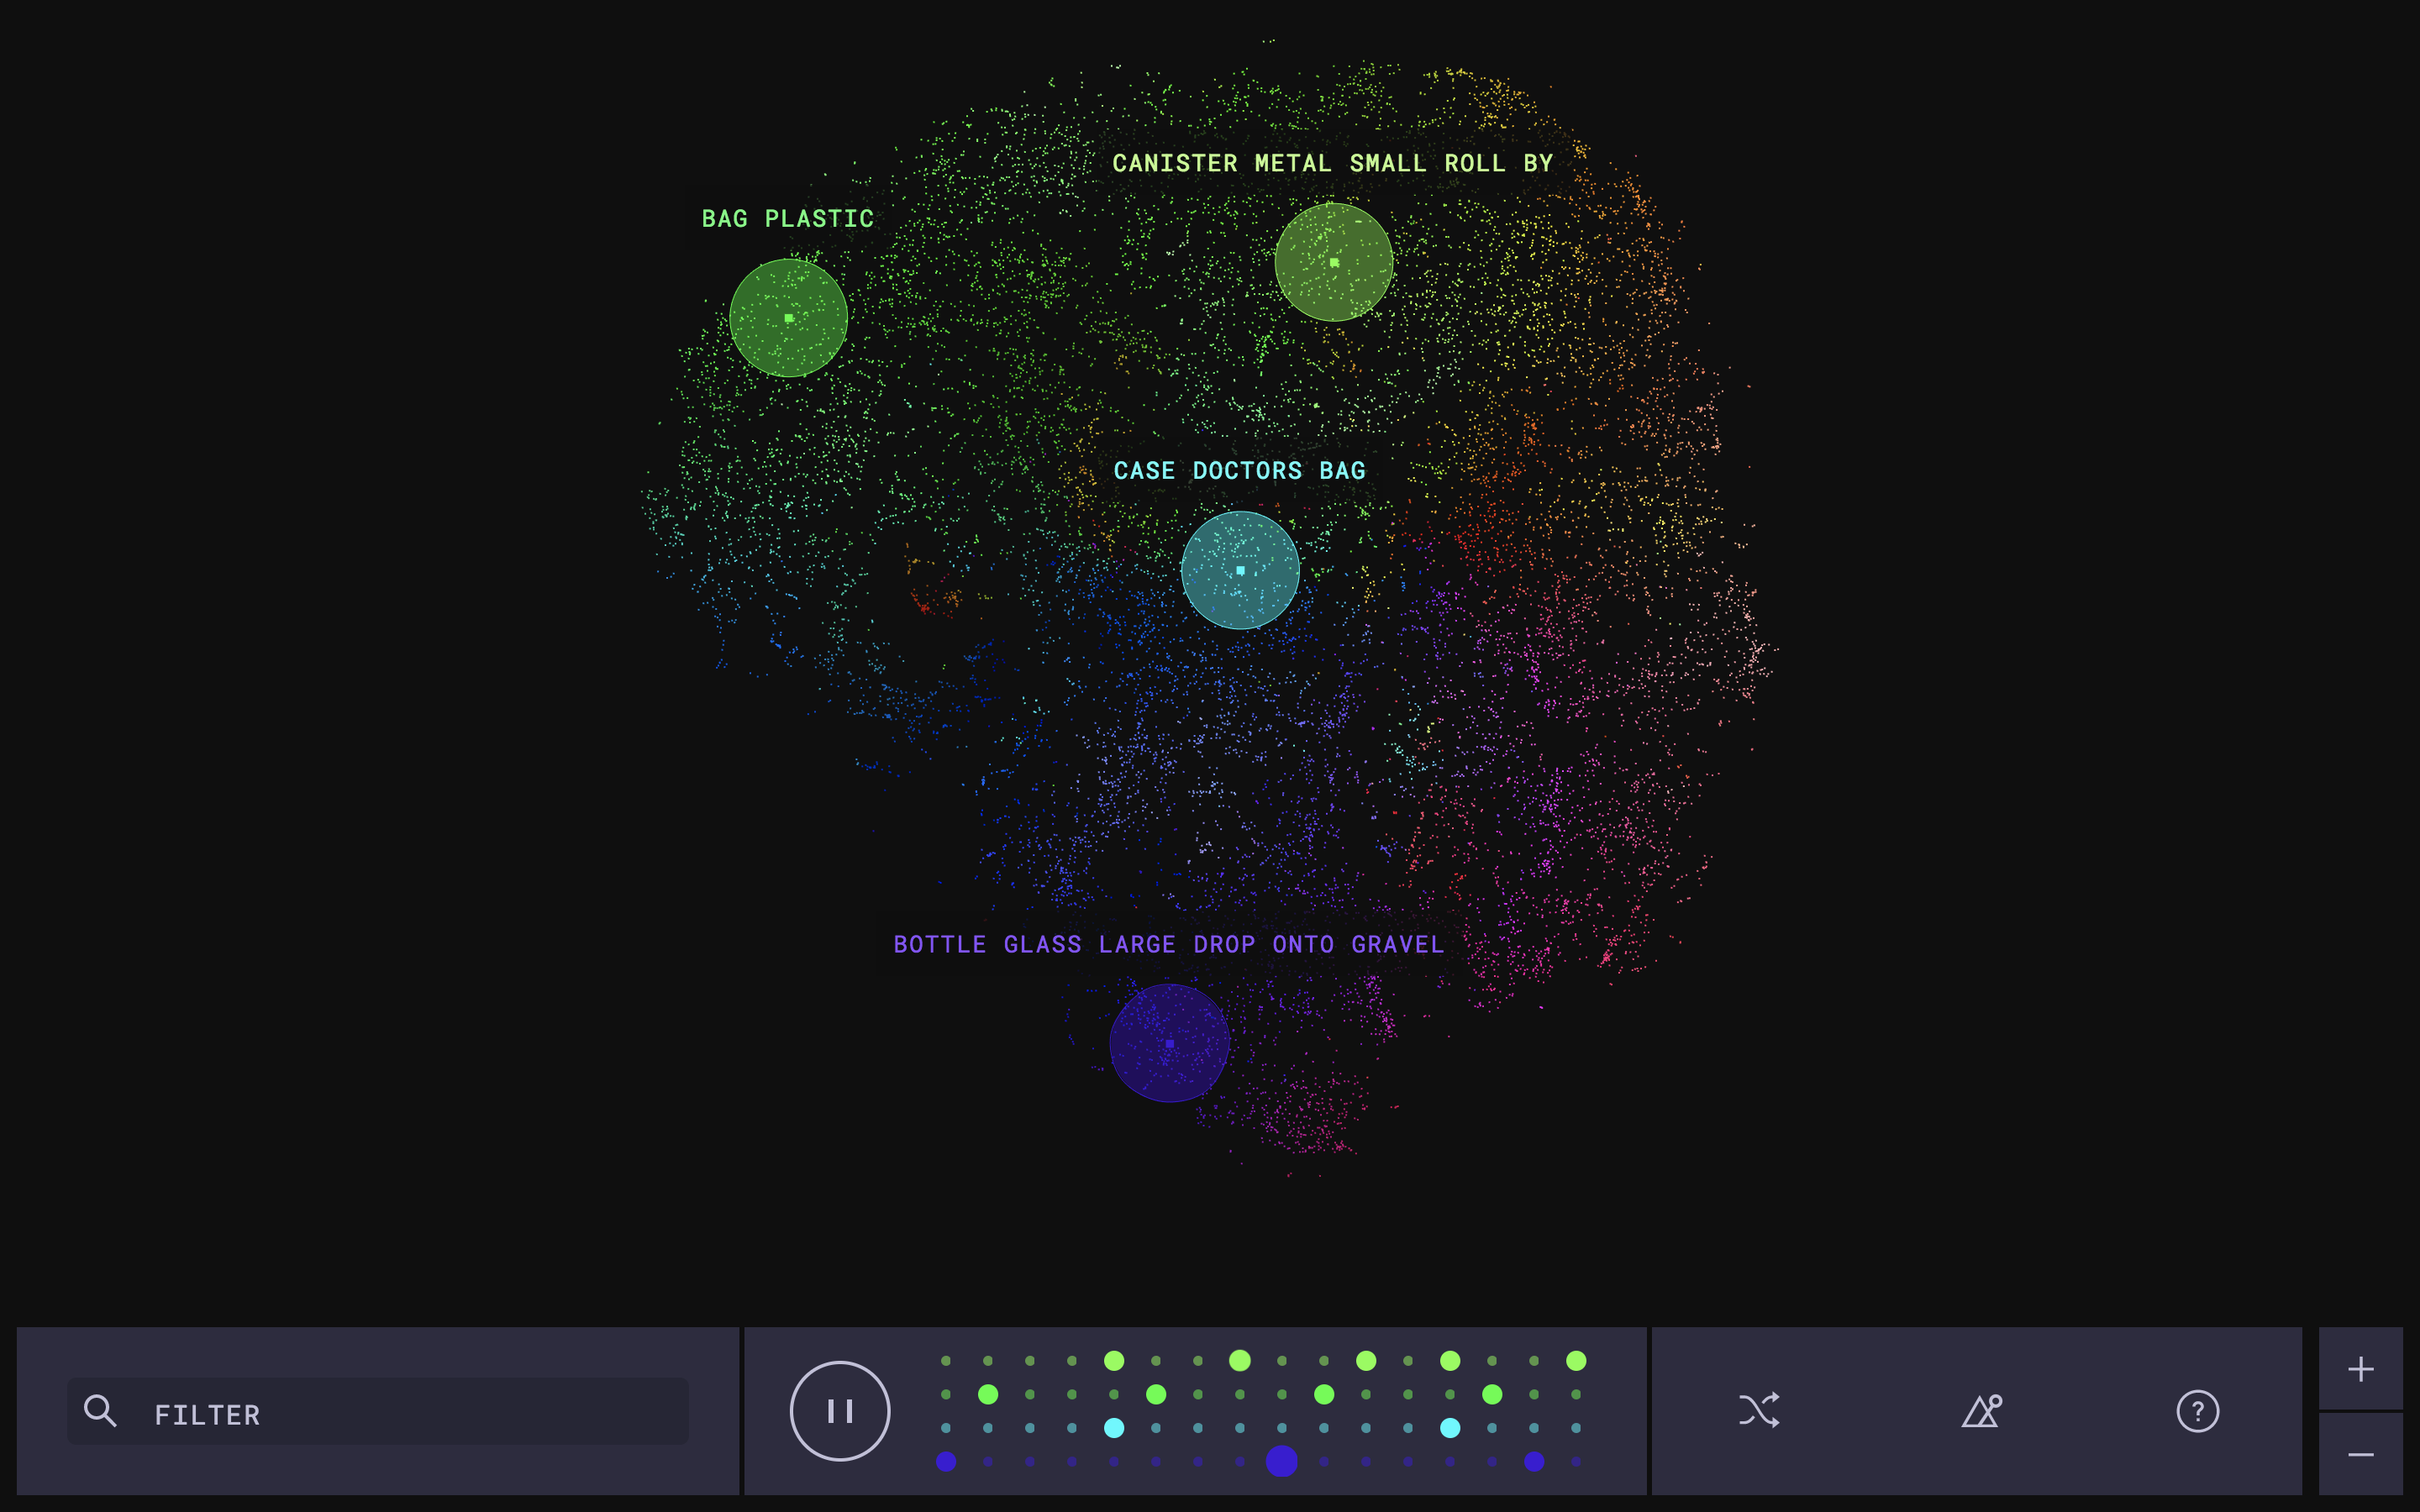 A screenshot of The Infinite Drum Machine. Showing the sample map with certain sounds like “Bag Plastic” highlighted and a drum sequencer at the bottom.